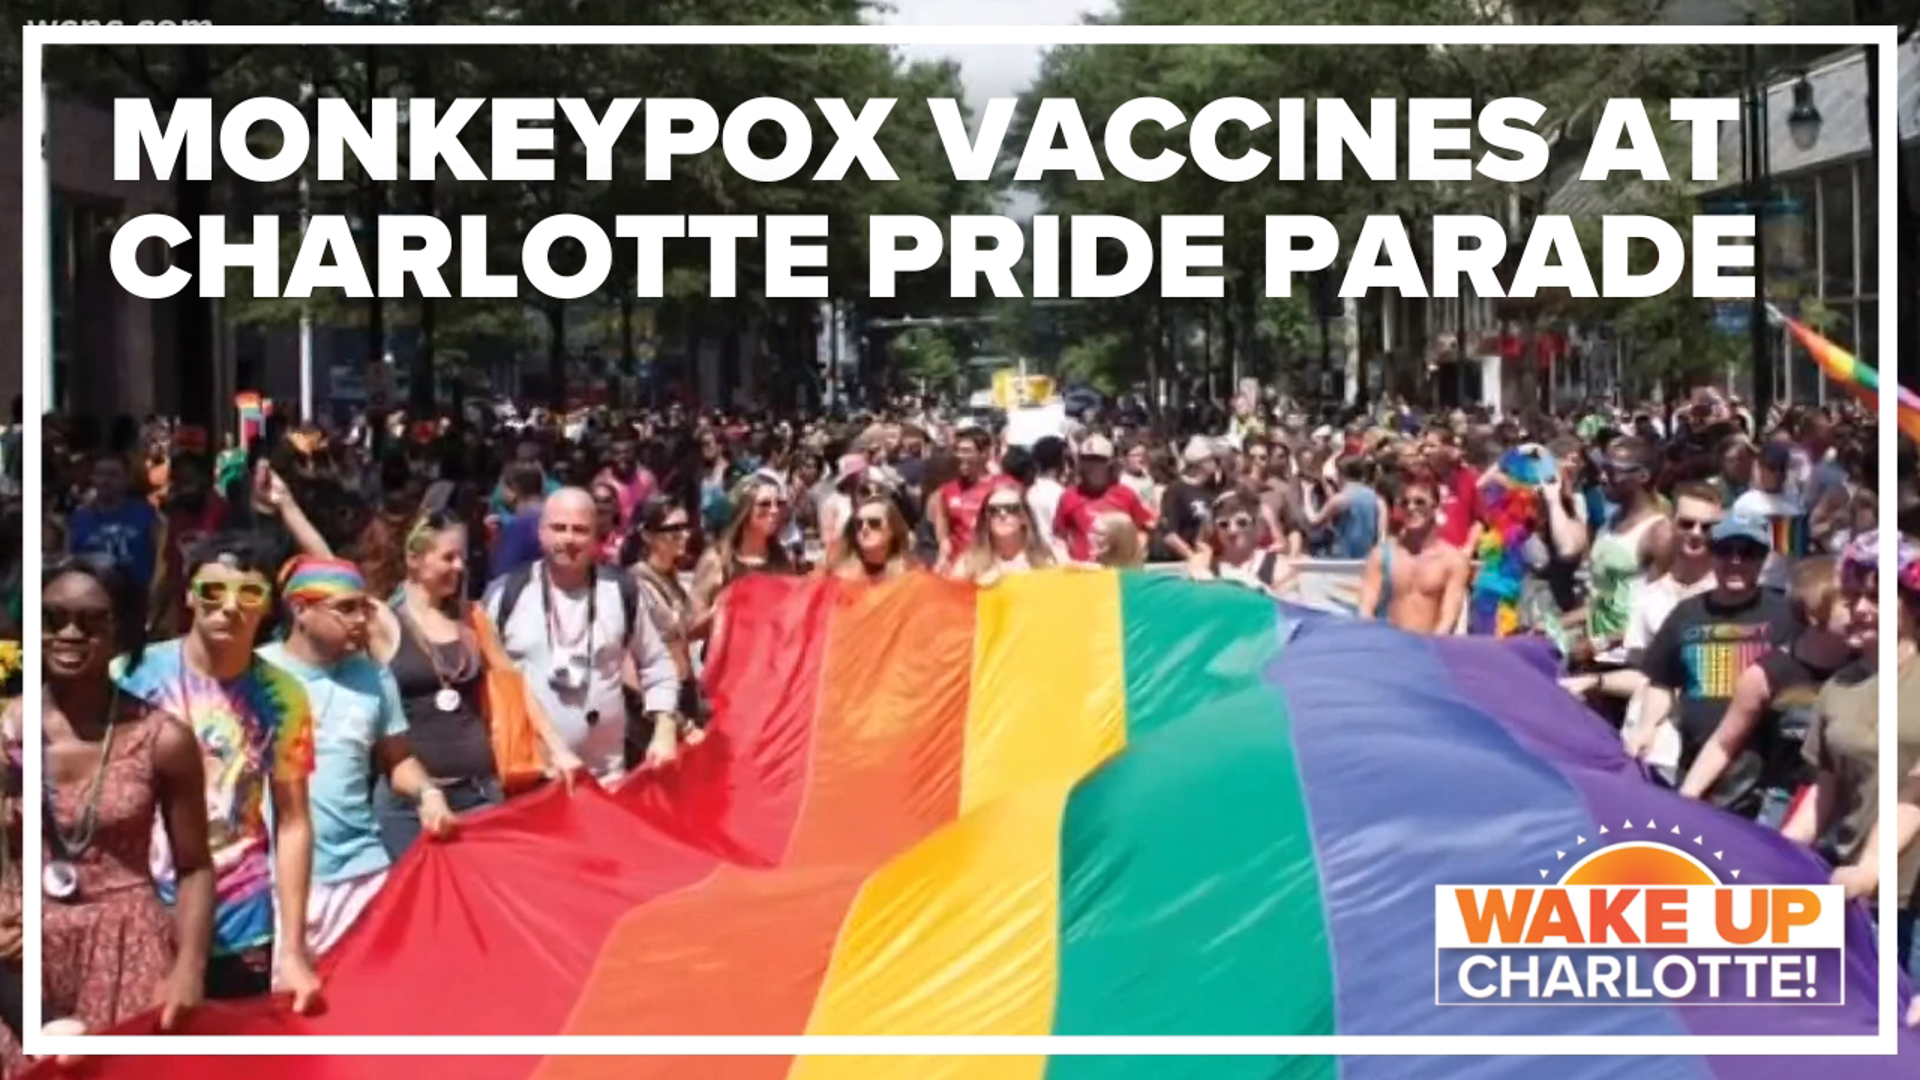 Mecklenburg County continues to be the epicenter of the outbreak in North Carolina. An extra 2,000 vaccine doses will be delivered to Charlotte for Pride weekend.